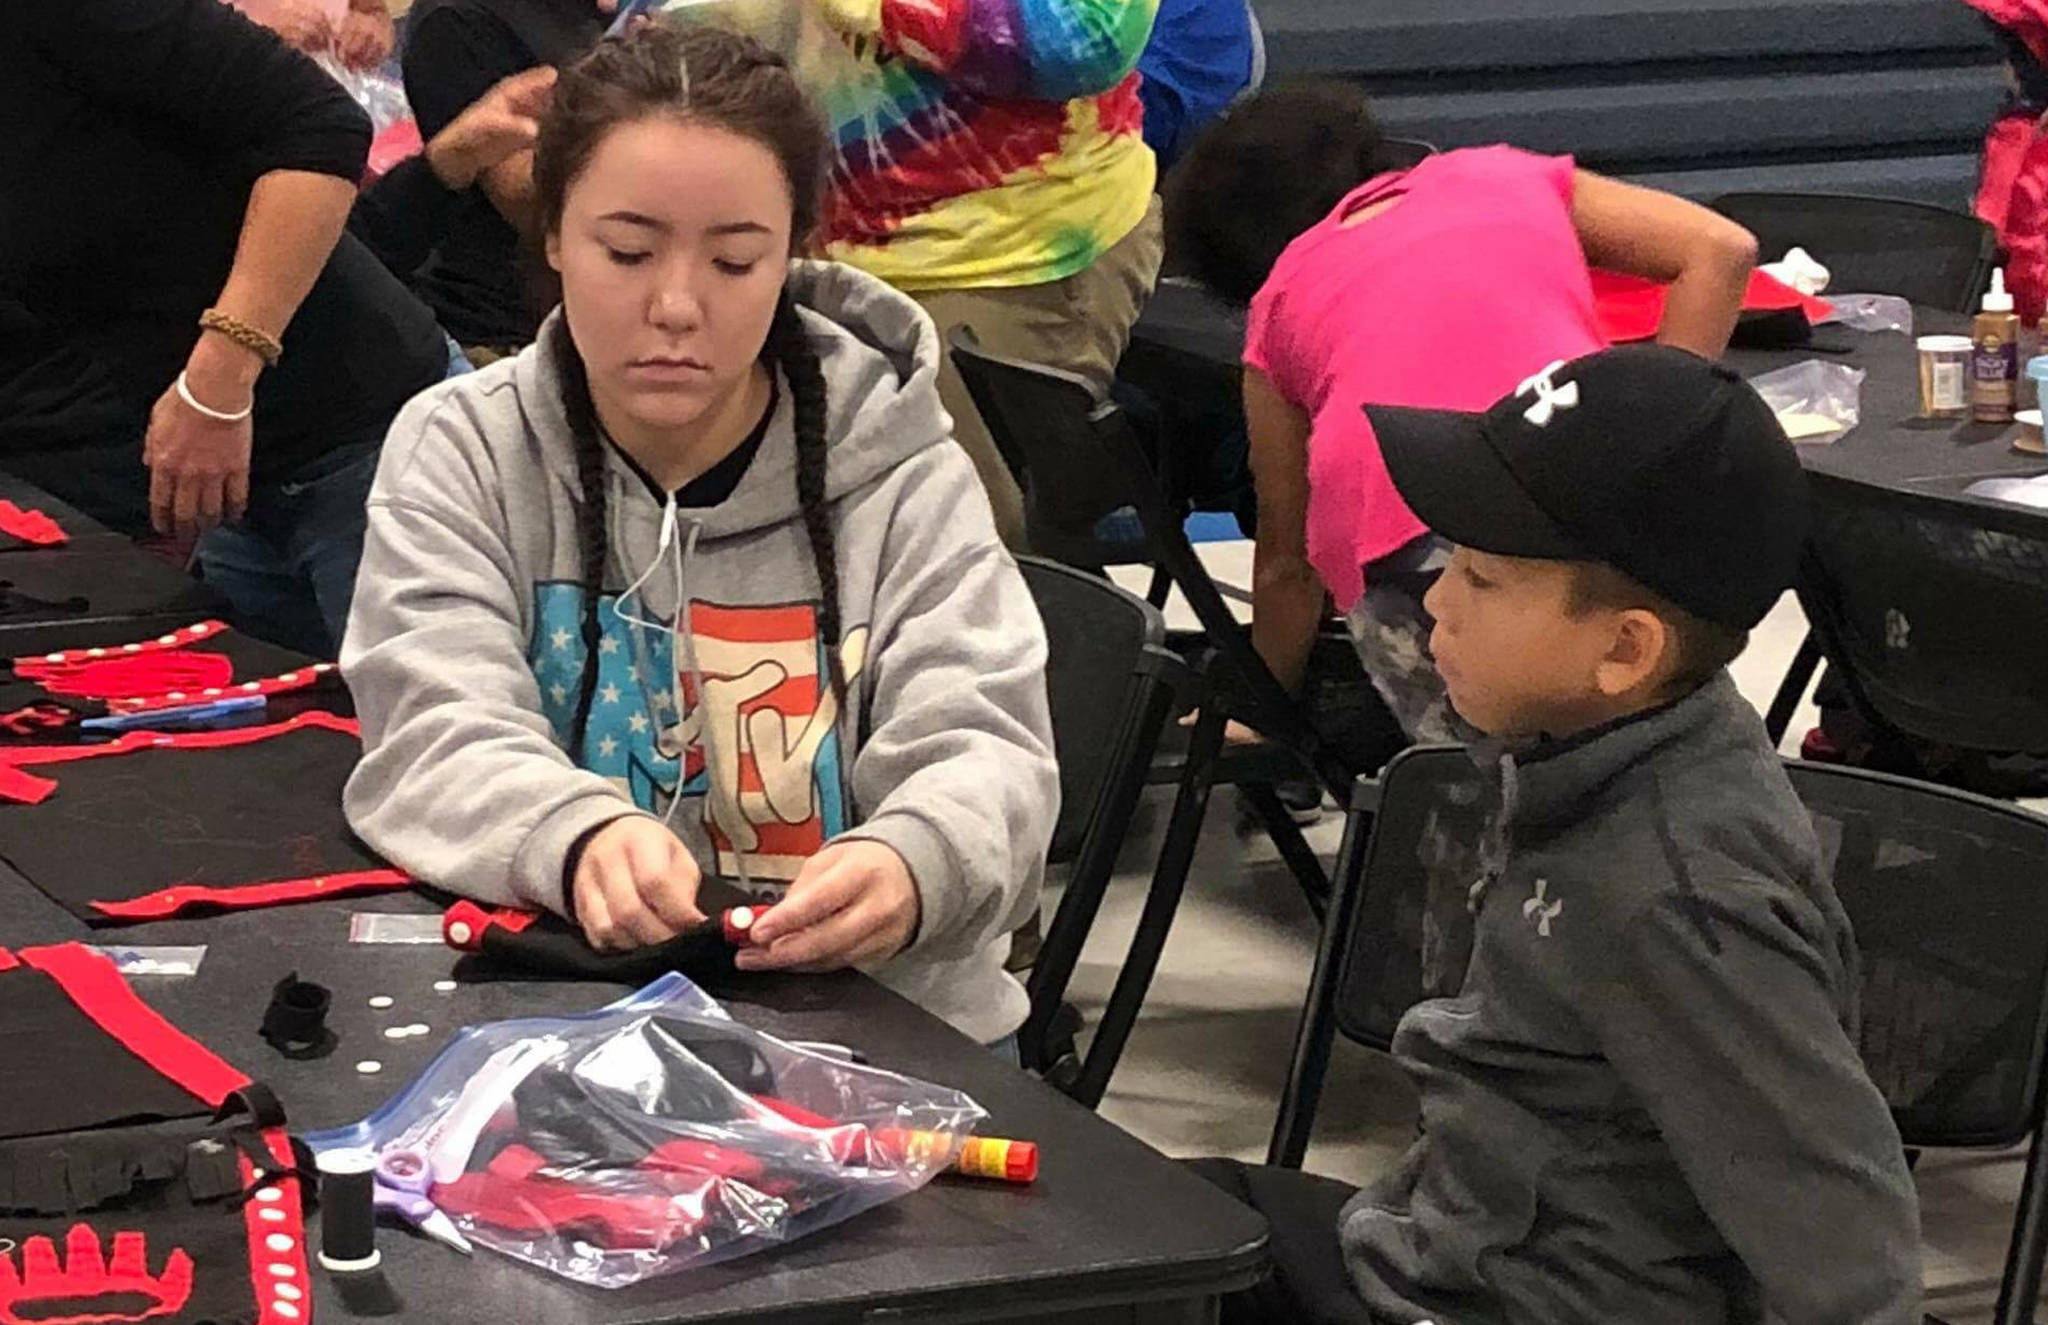 Sydney Johnson helps her brother Tristan with an art project at an Alaska Native culture camp on Thursday, Aug. 2, 2018. (Courtesy Photo | Rose Willard)